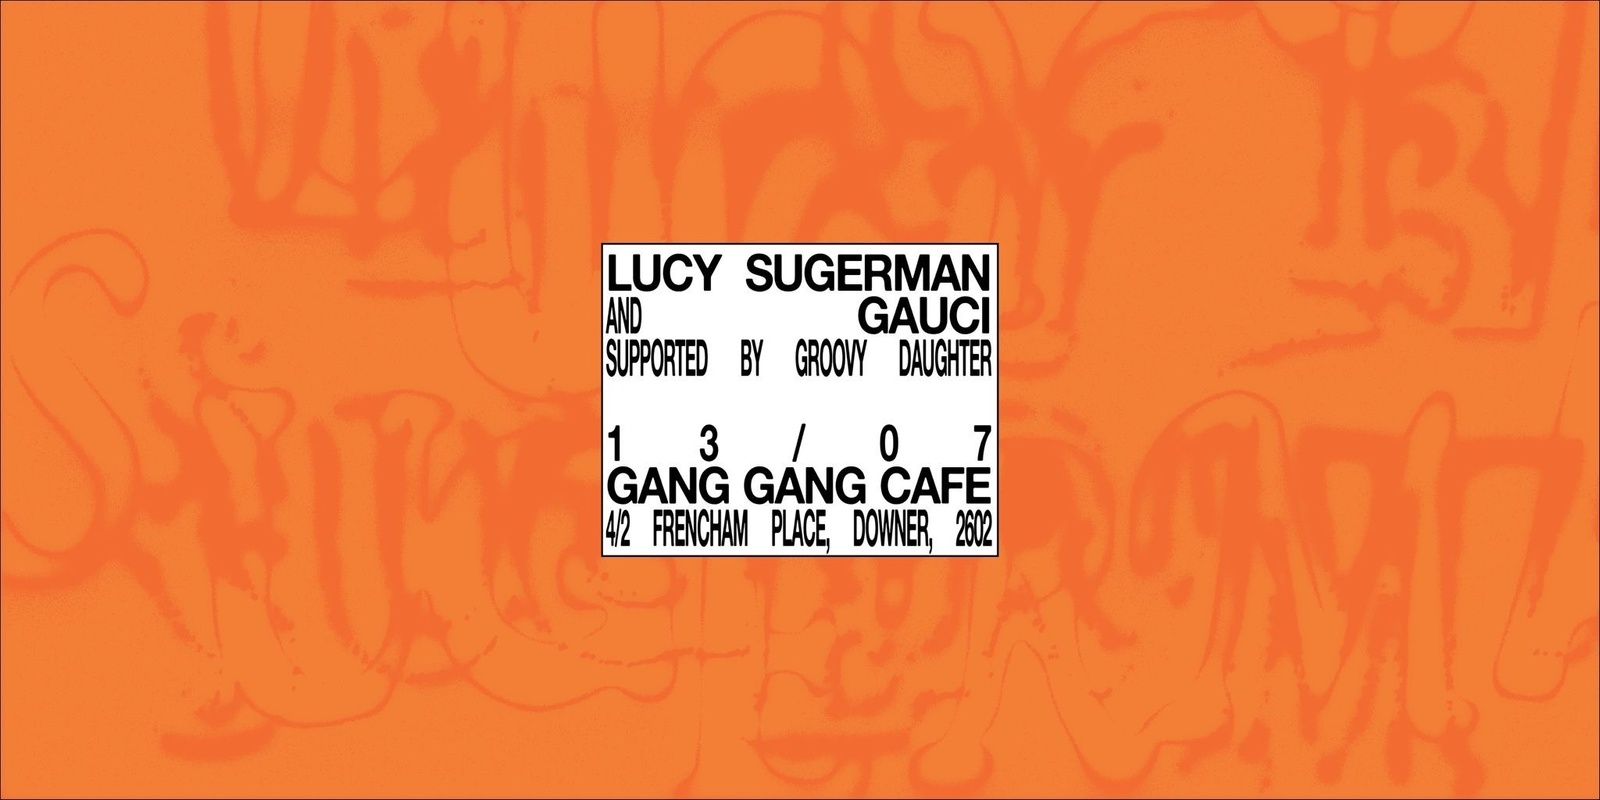 Banner image for Lucy Sugerman / GAUCI / Groovy Daughter 